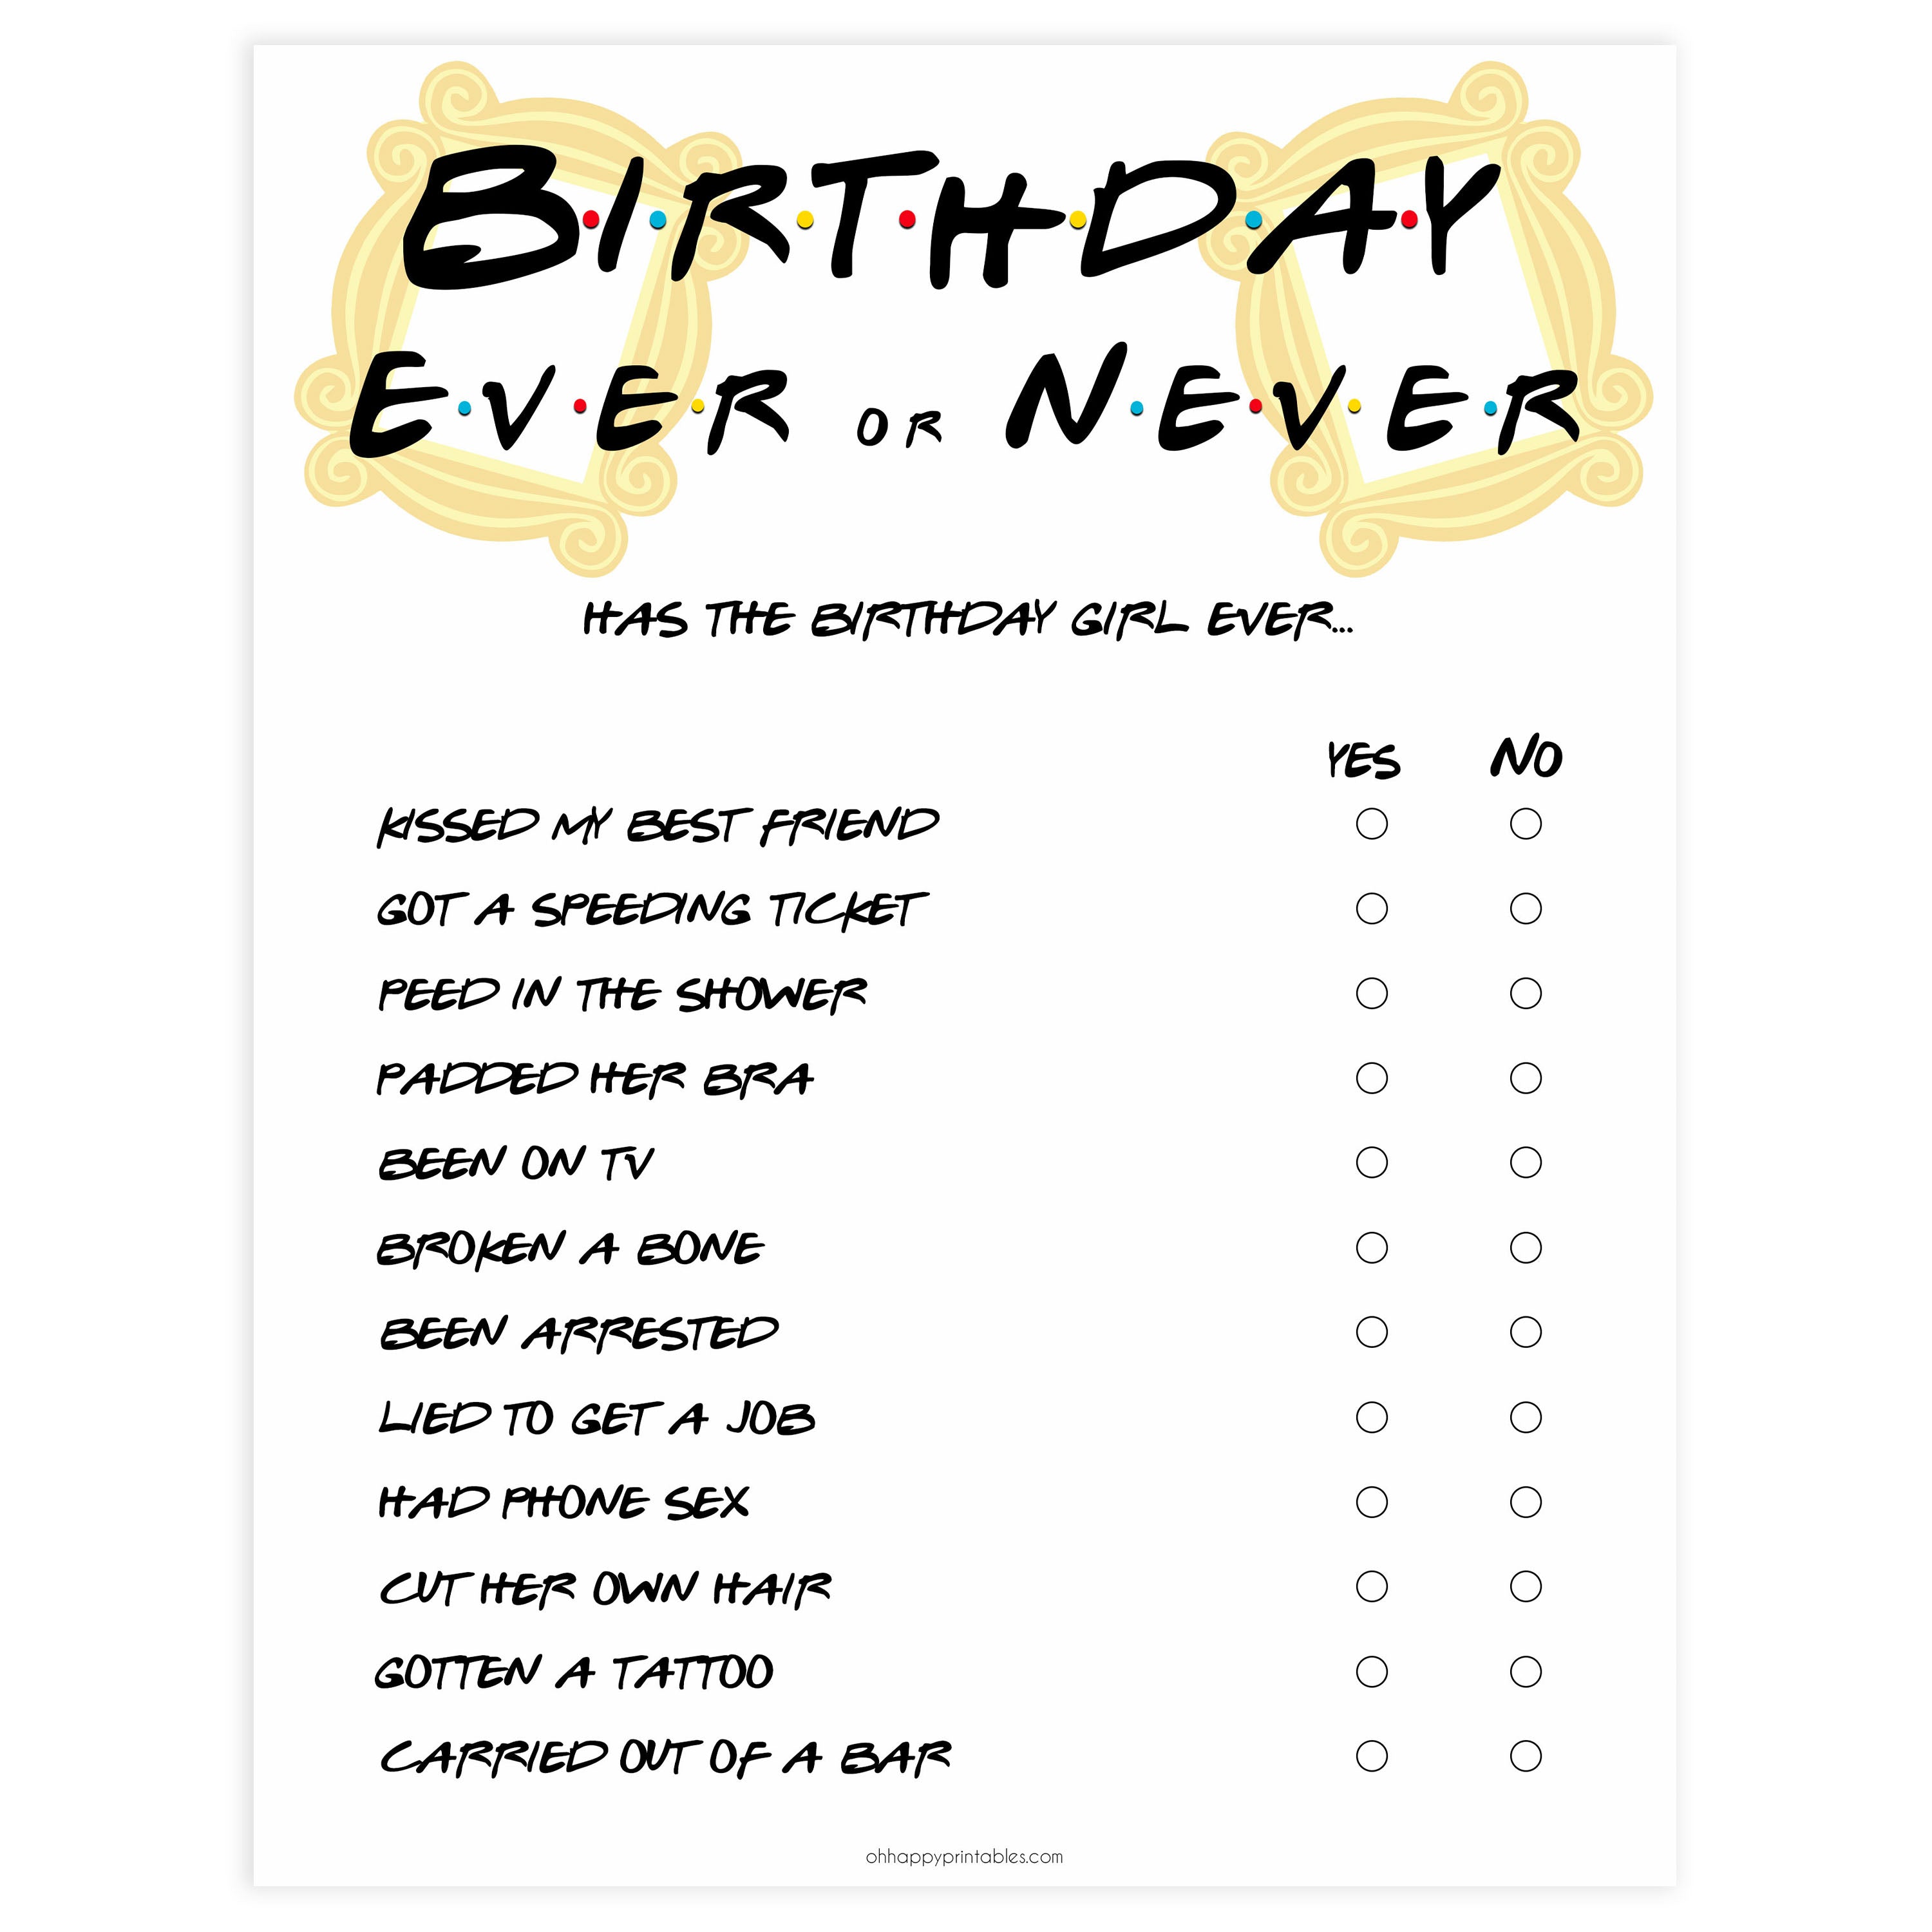 friends birthday games, ever or never game, fun birthday games, printable birthday games